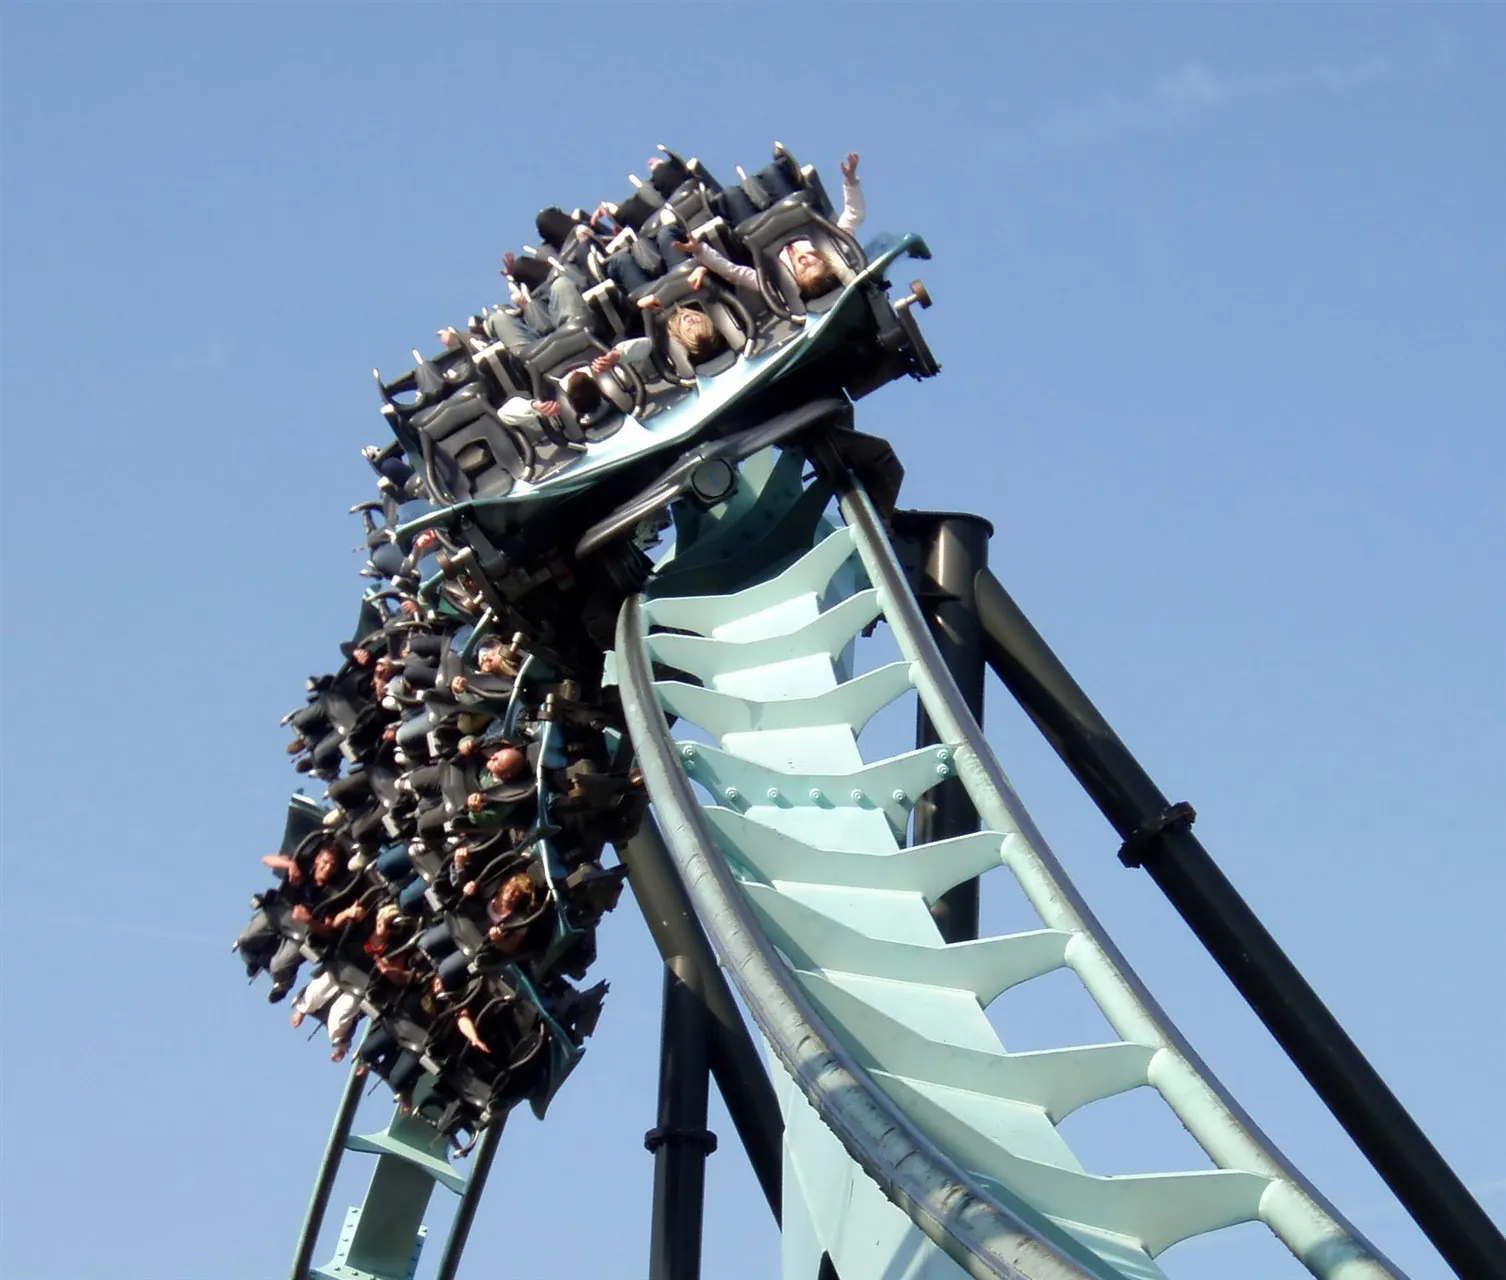 The UK's 5 best theme parks for kids?